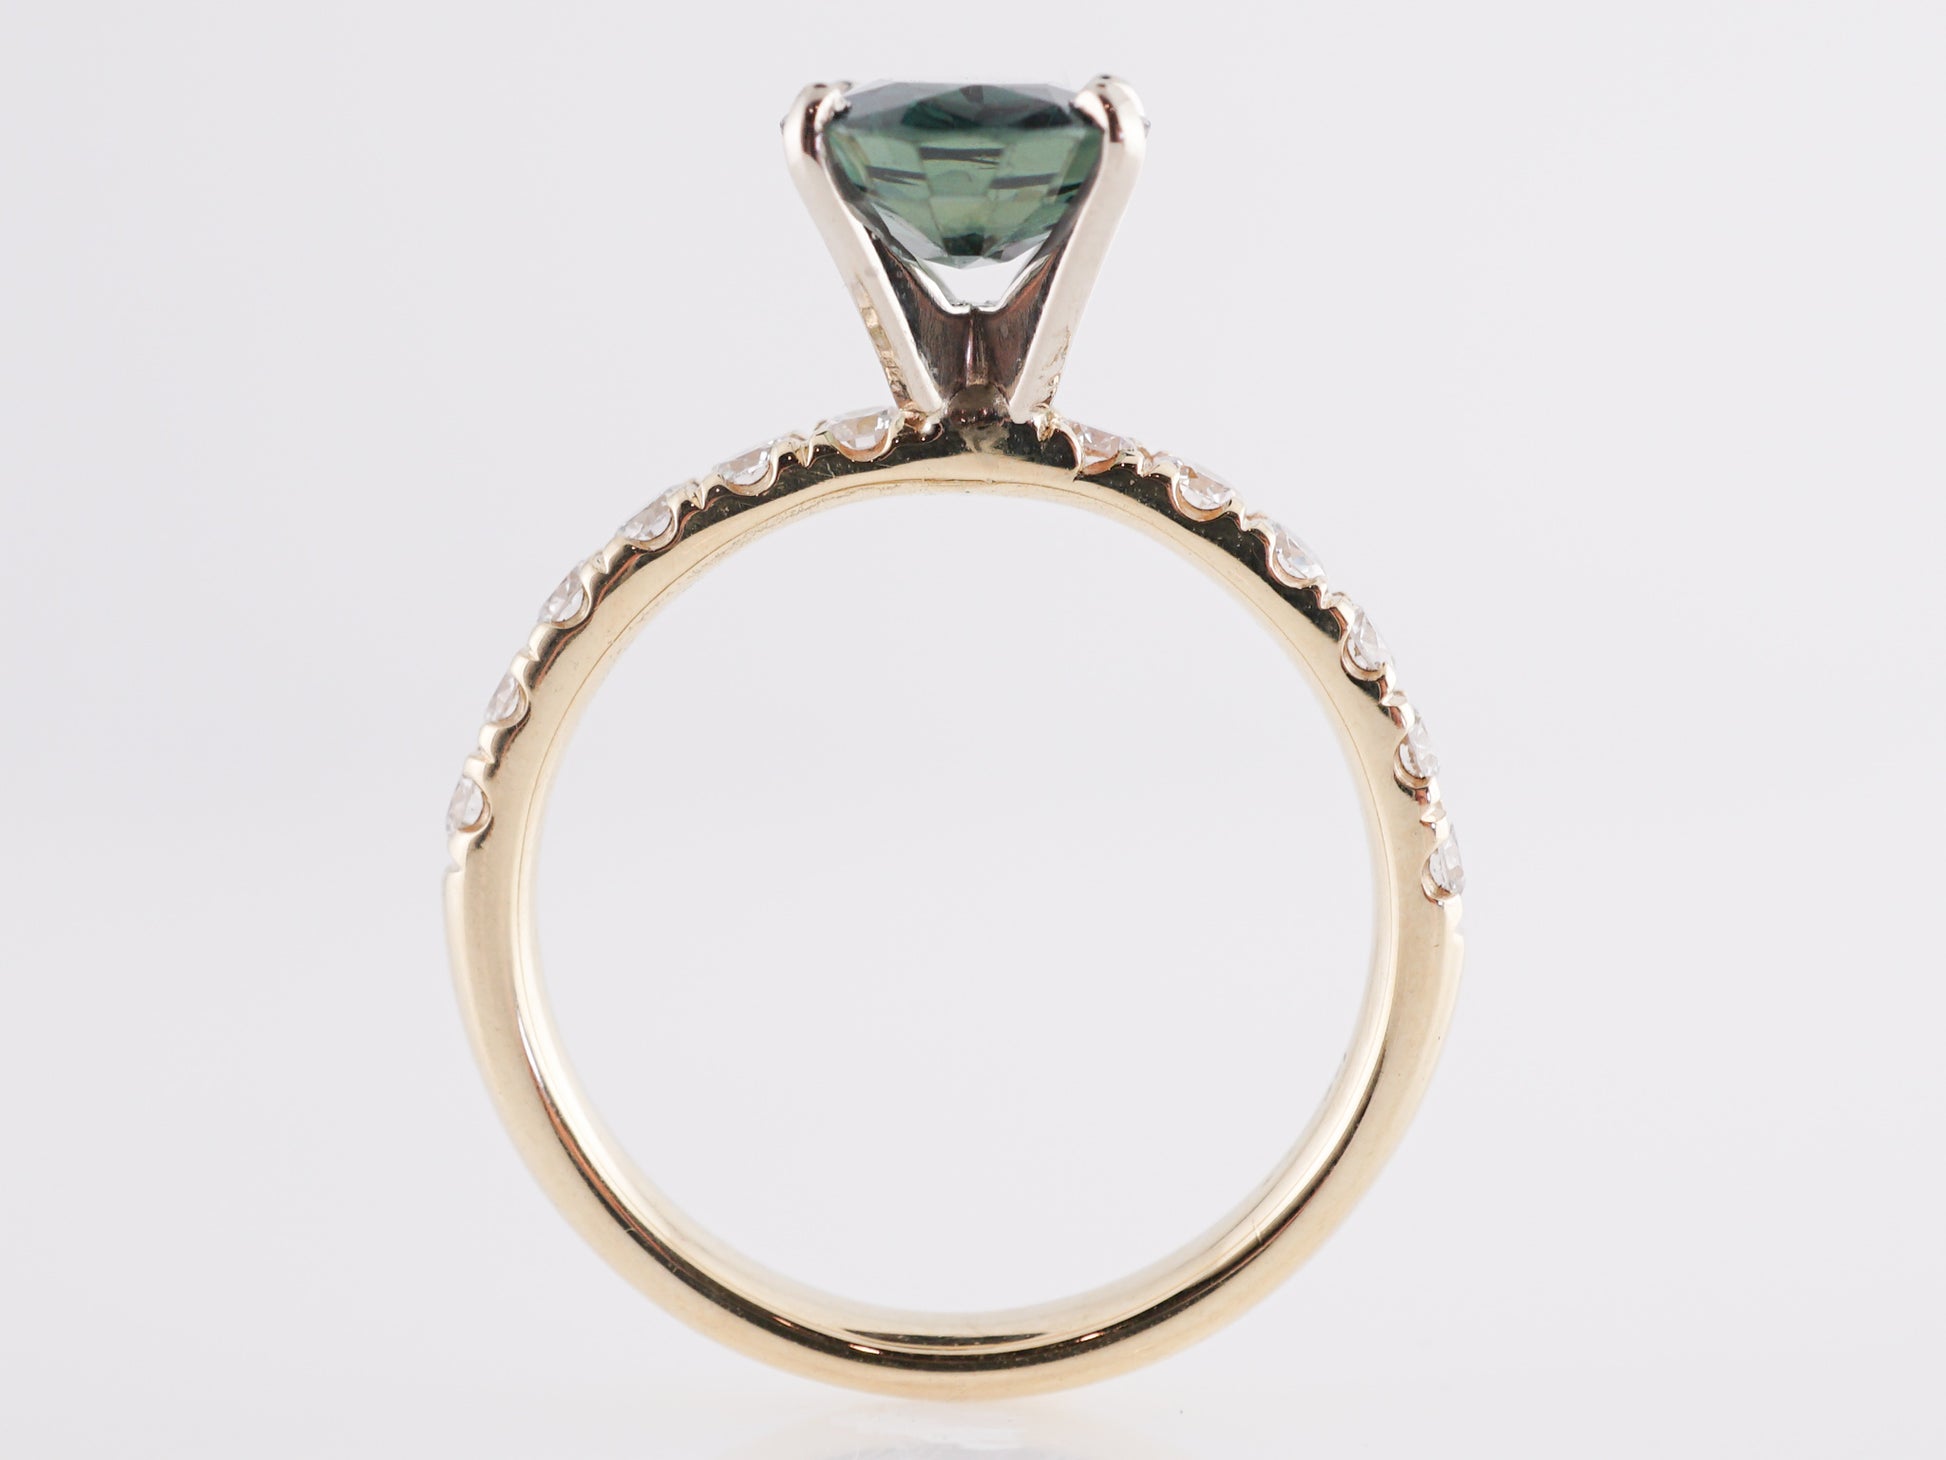 2.44 Oval Green Sapphire Engagement Ring in 14K Yellow GoldComposition: PlatinumRing Size: 6.5Total Diamond Weight: .44 ctTotal Gram Weight: 2.8 gInscription: 14k